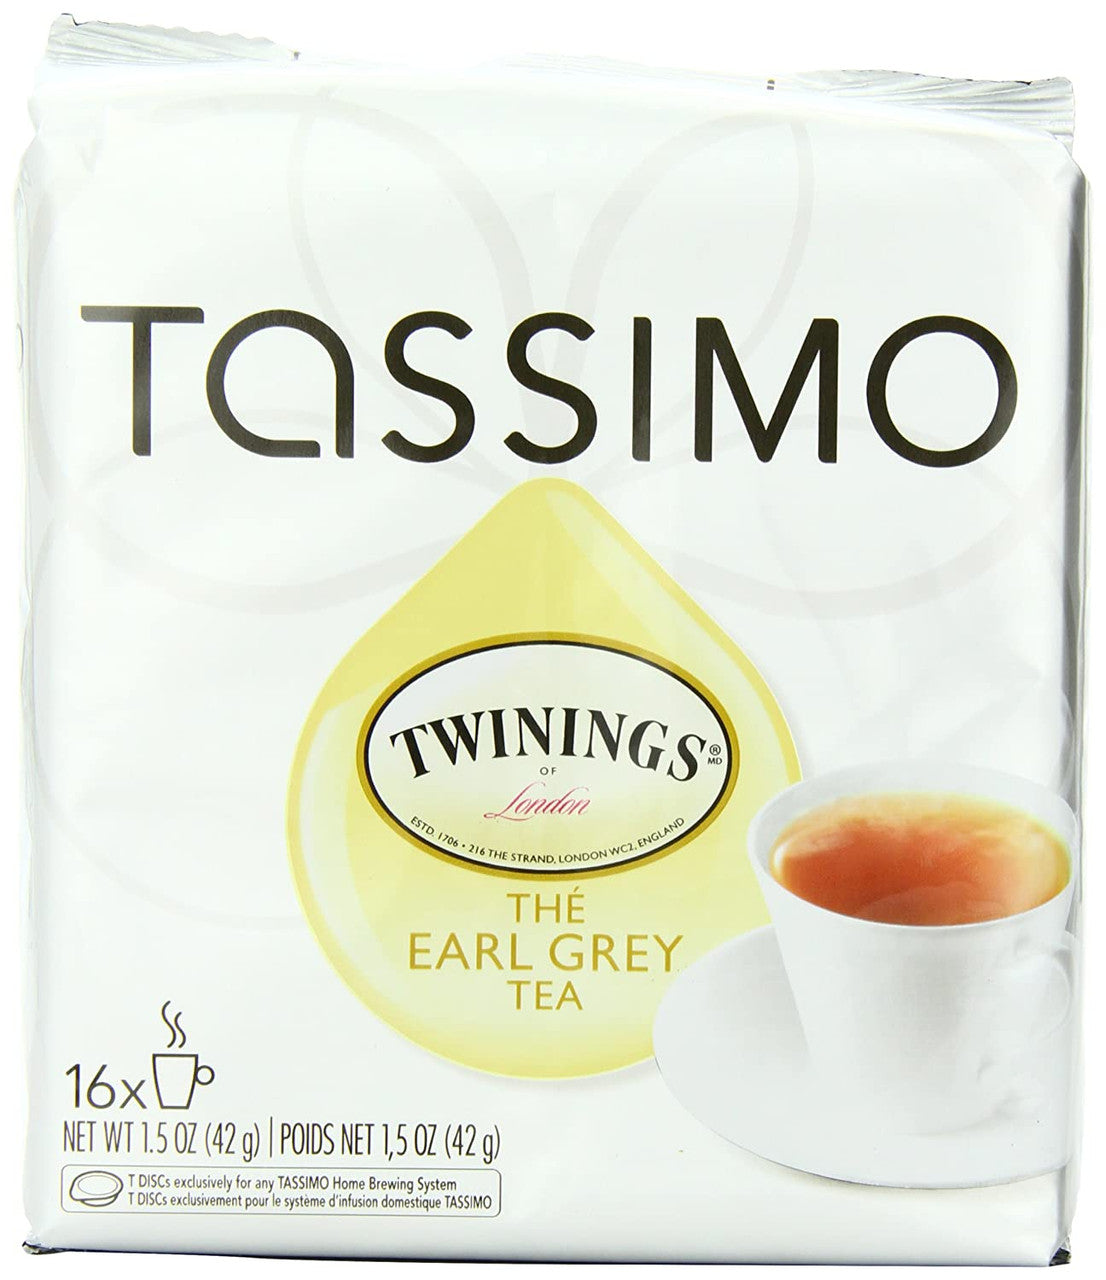 Tassimo Twinings Earl Grey Tea, 48 T-Discs (3 Boxes of 16 T-Discs) {Imported from Canada}